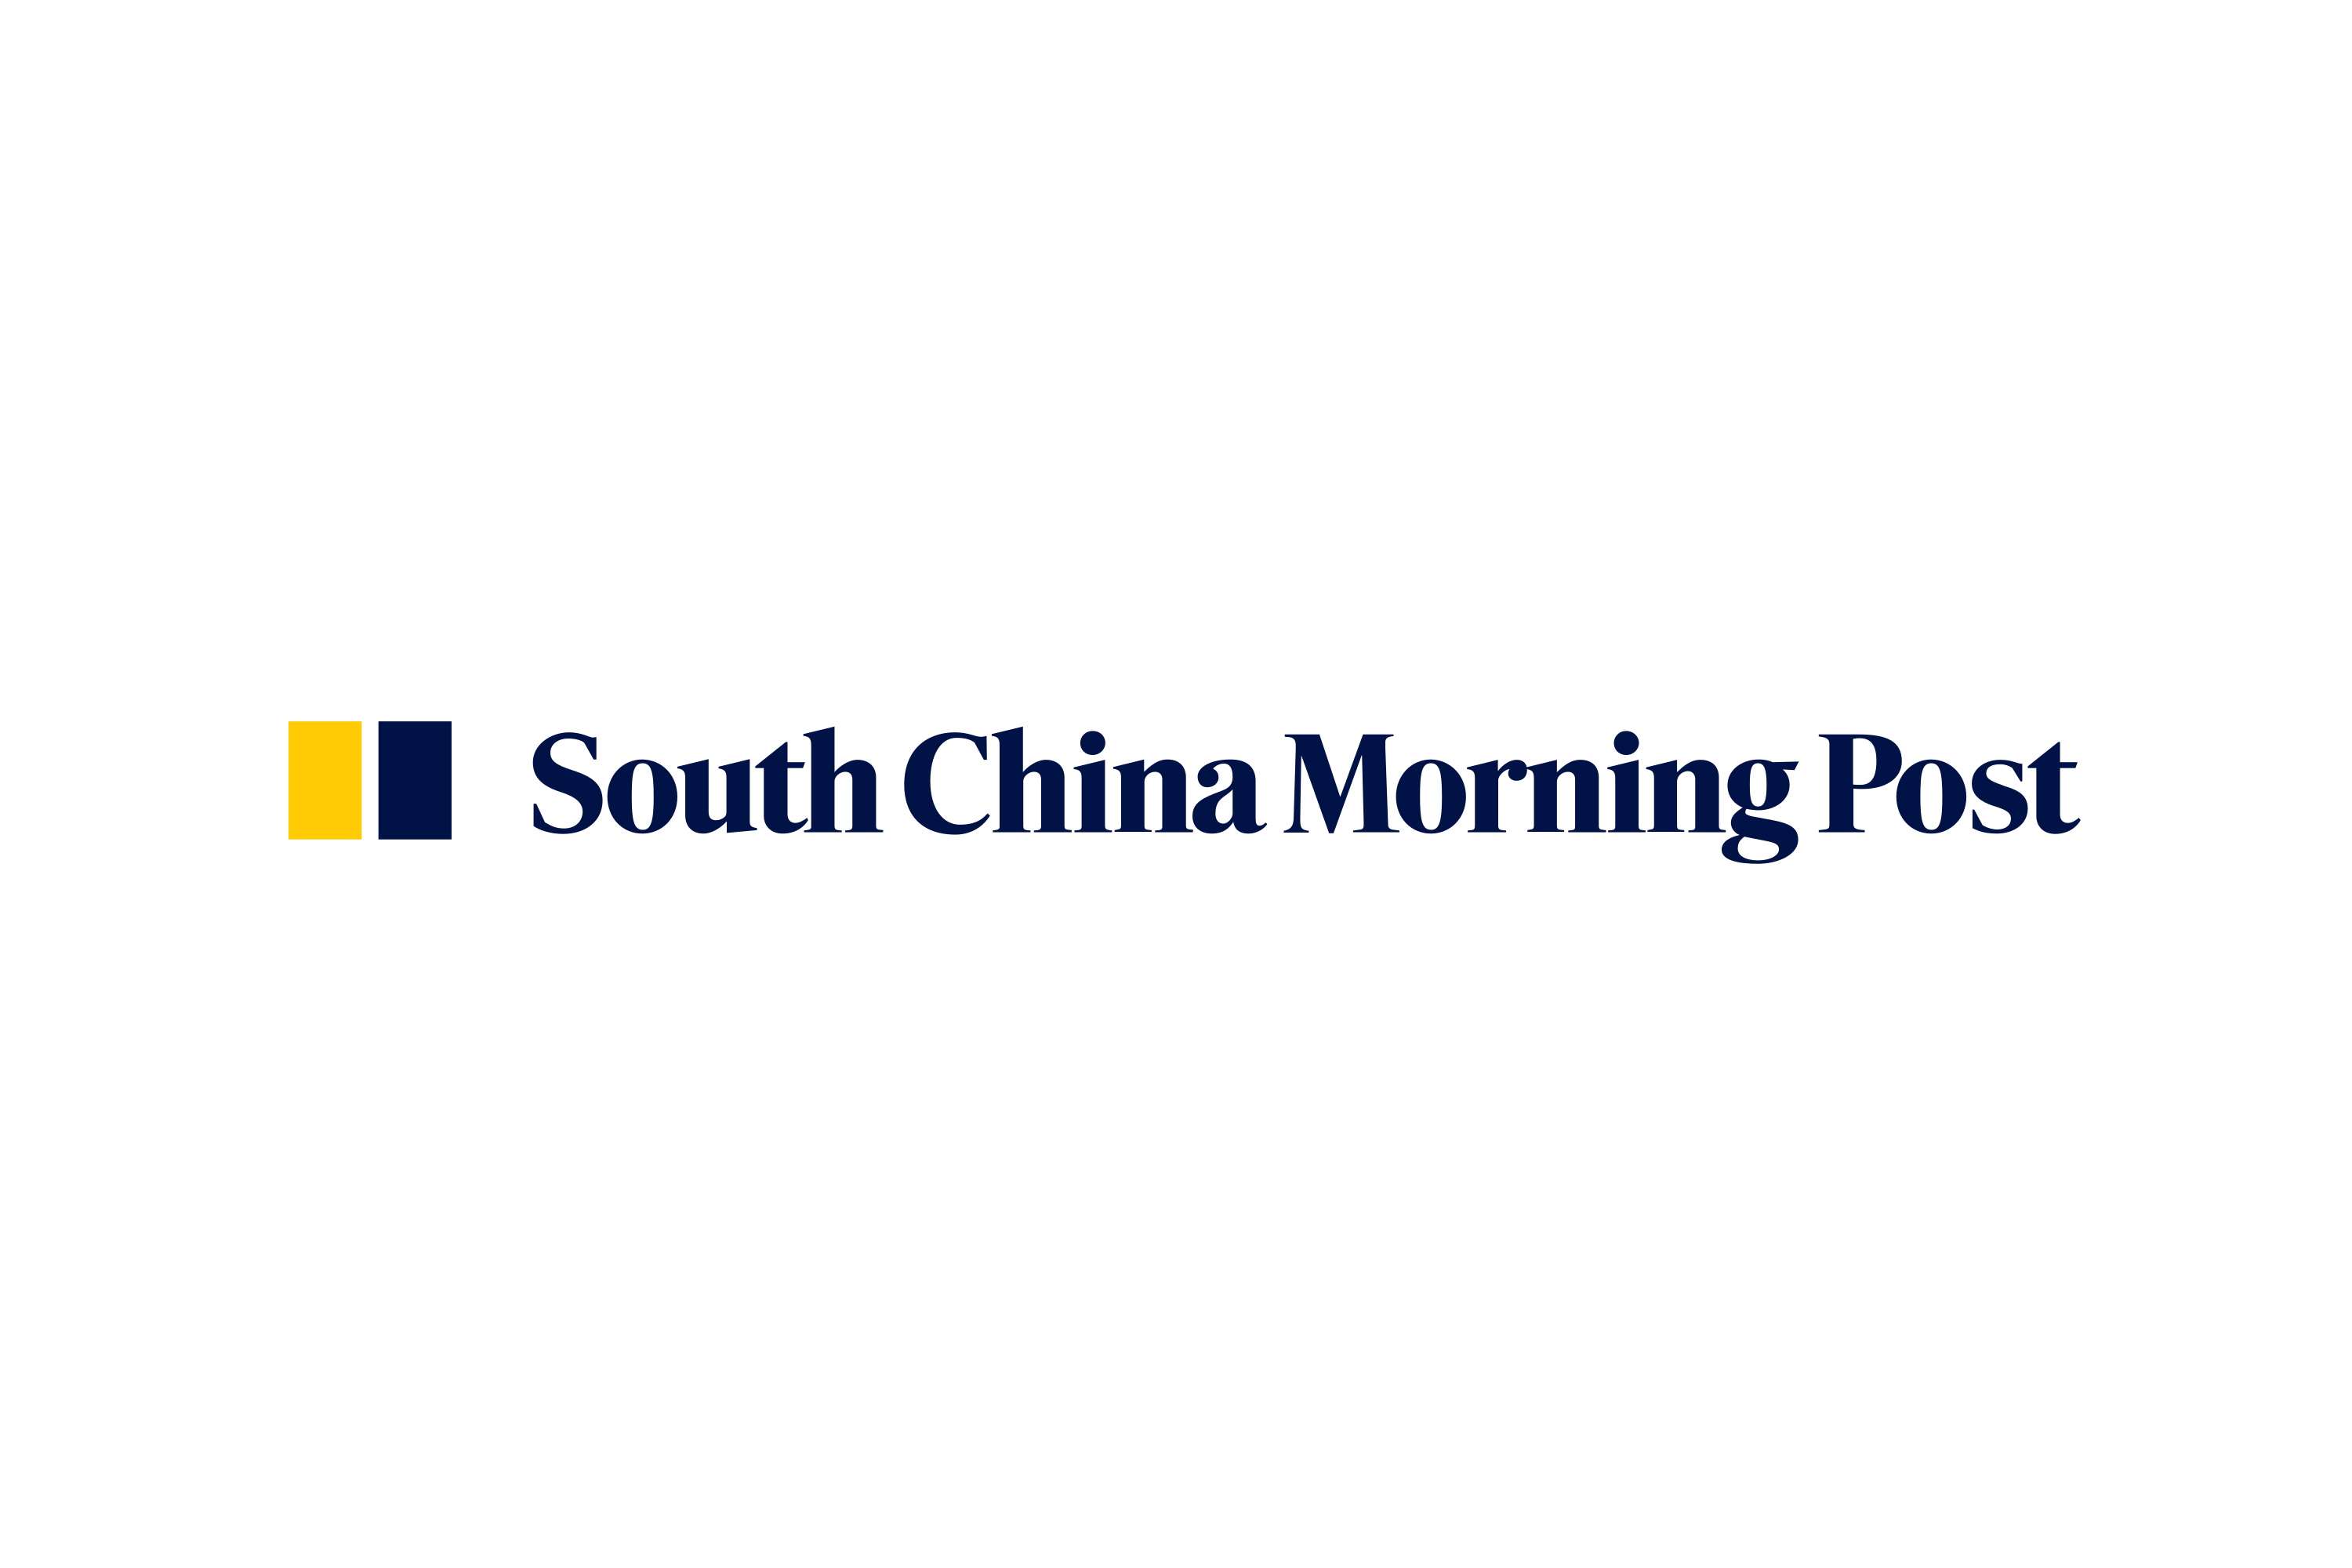 Committee of 100 and University of Arizona&#8217;s joint research on Chinese scientists mentioned in this South China Morning Post article&#8230;